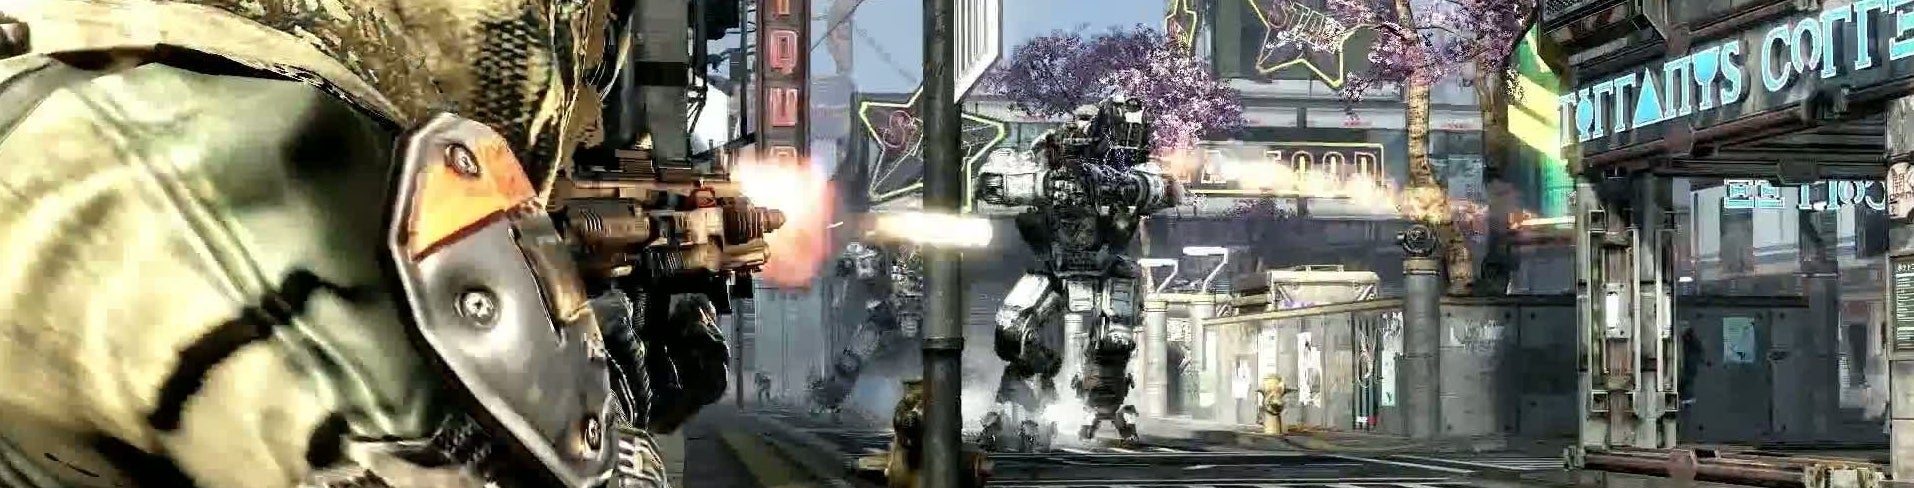 Image for Titanfall: the creators of Call of Duty reload the FPS